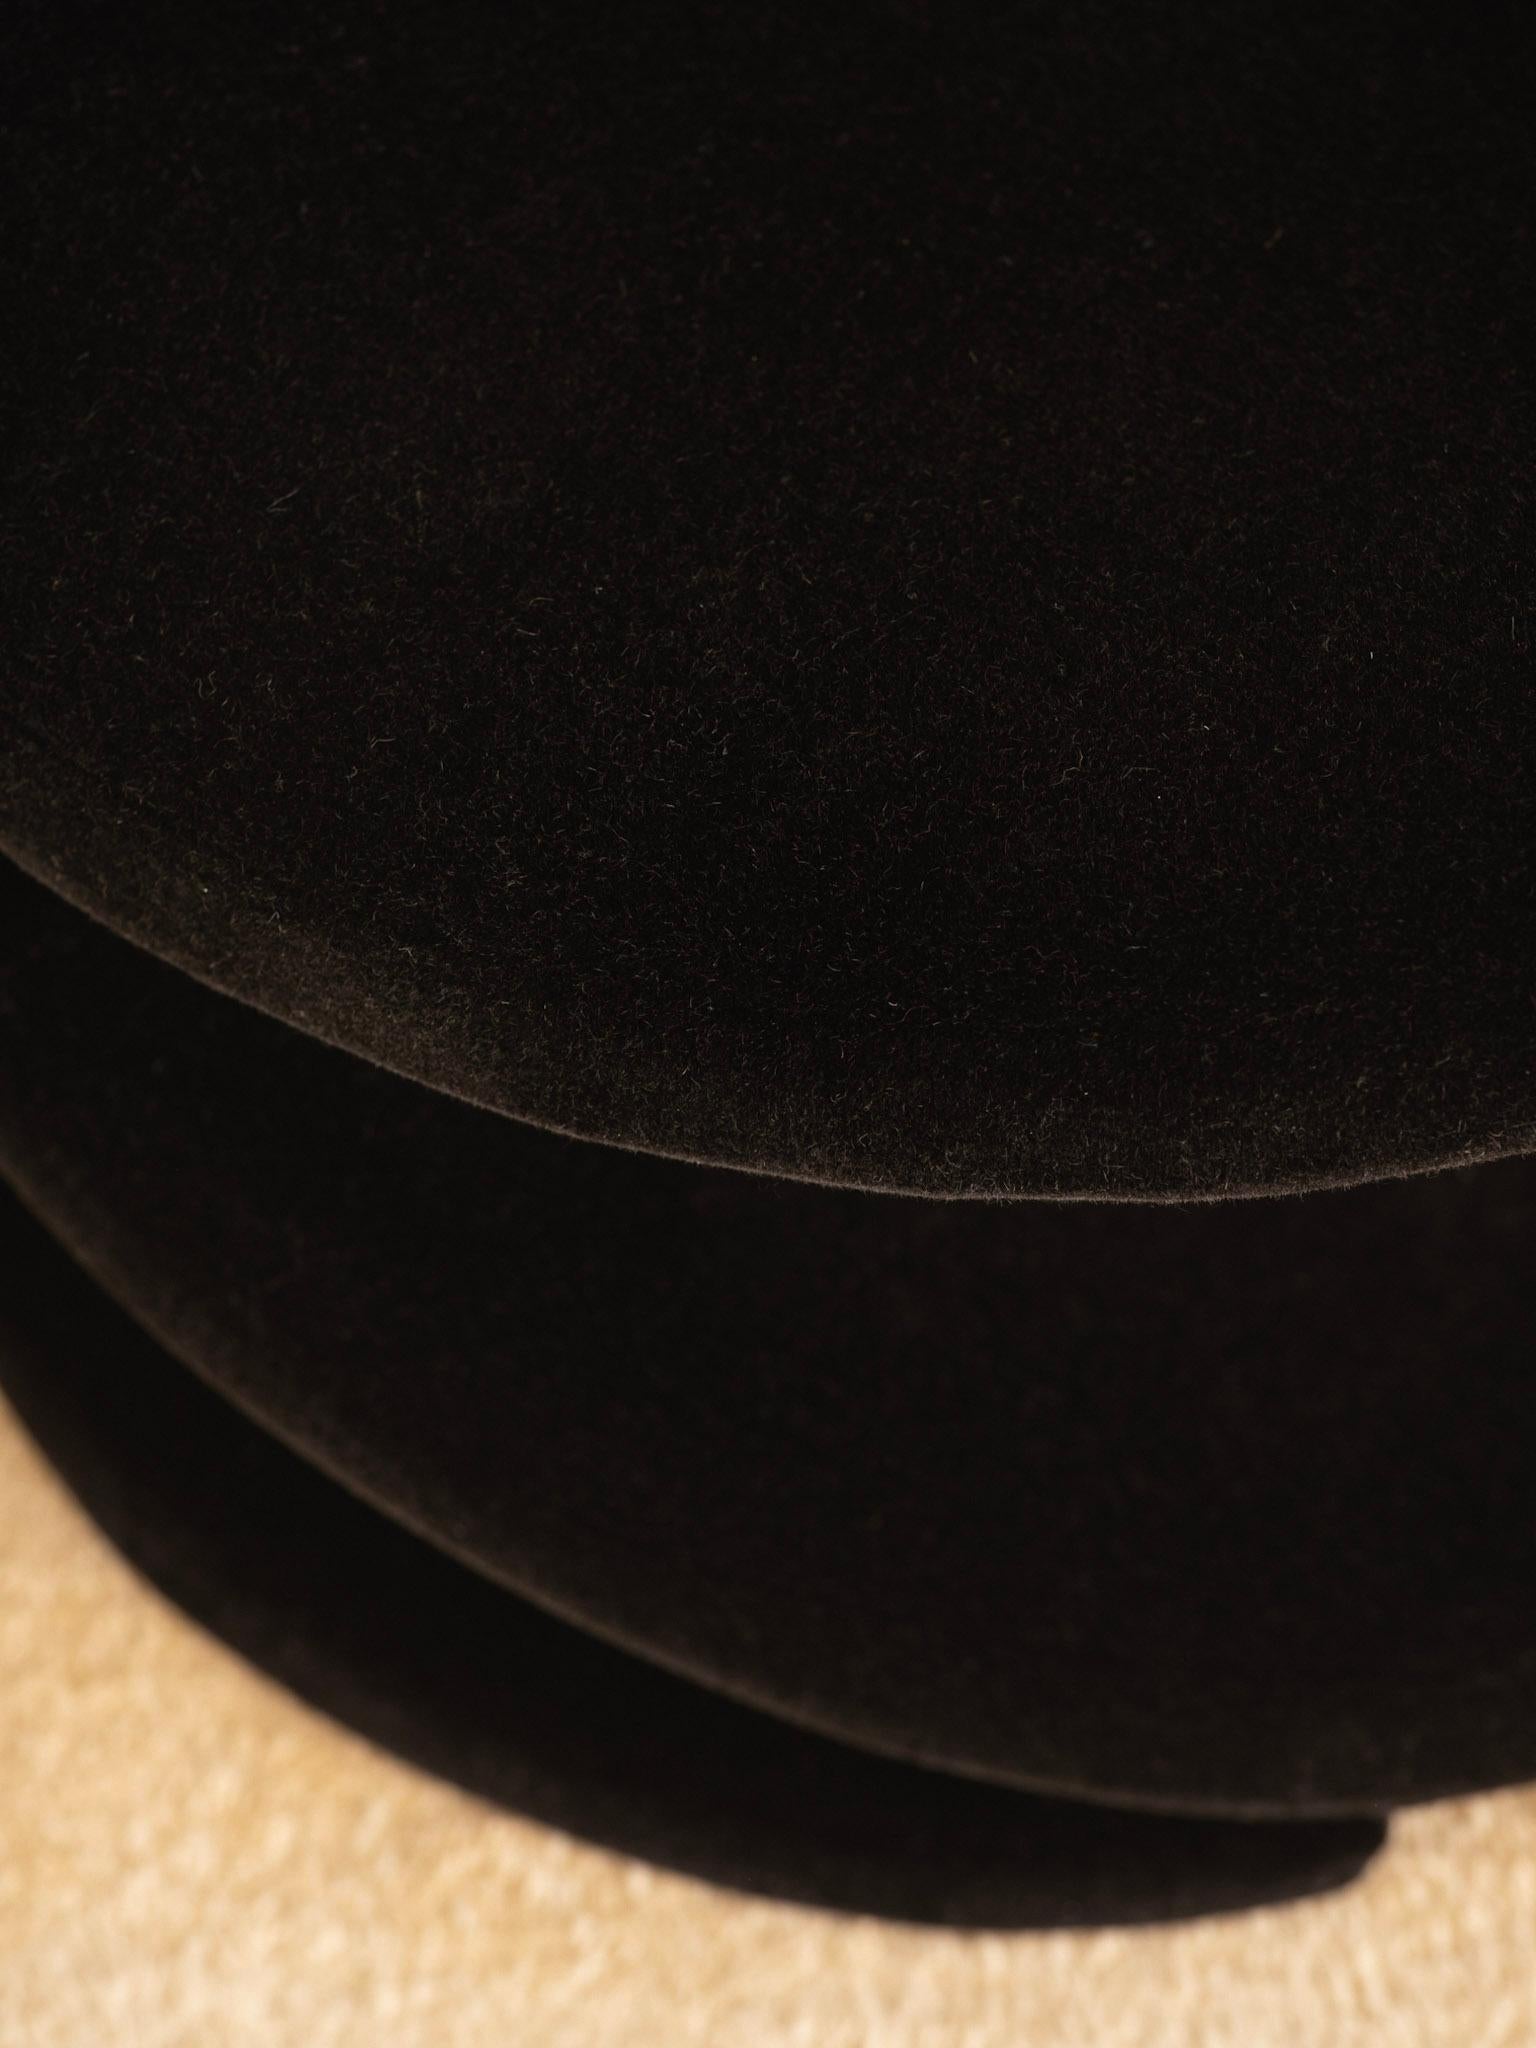 Sculptural Spiral Ribbon Chair in Black Mohair Attributed to Jaymar In Excellent Condition For Sale In Brooklyn, NY